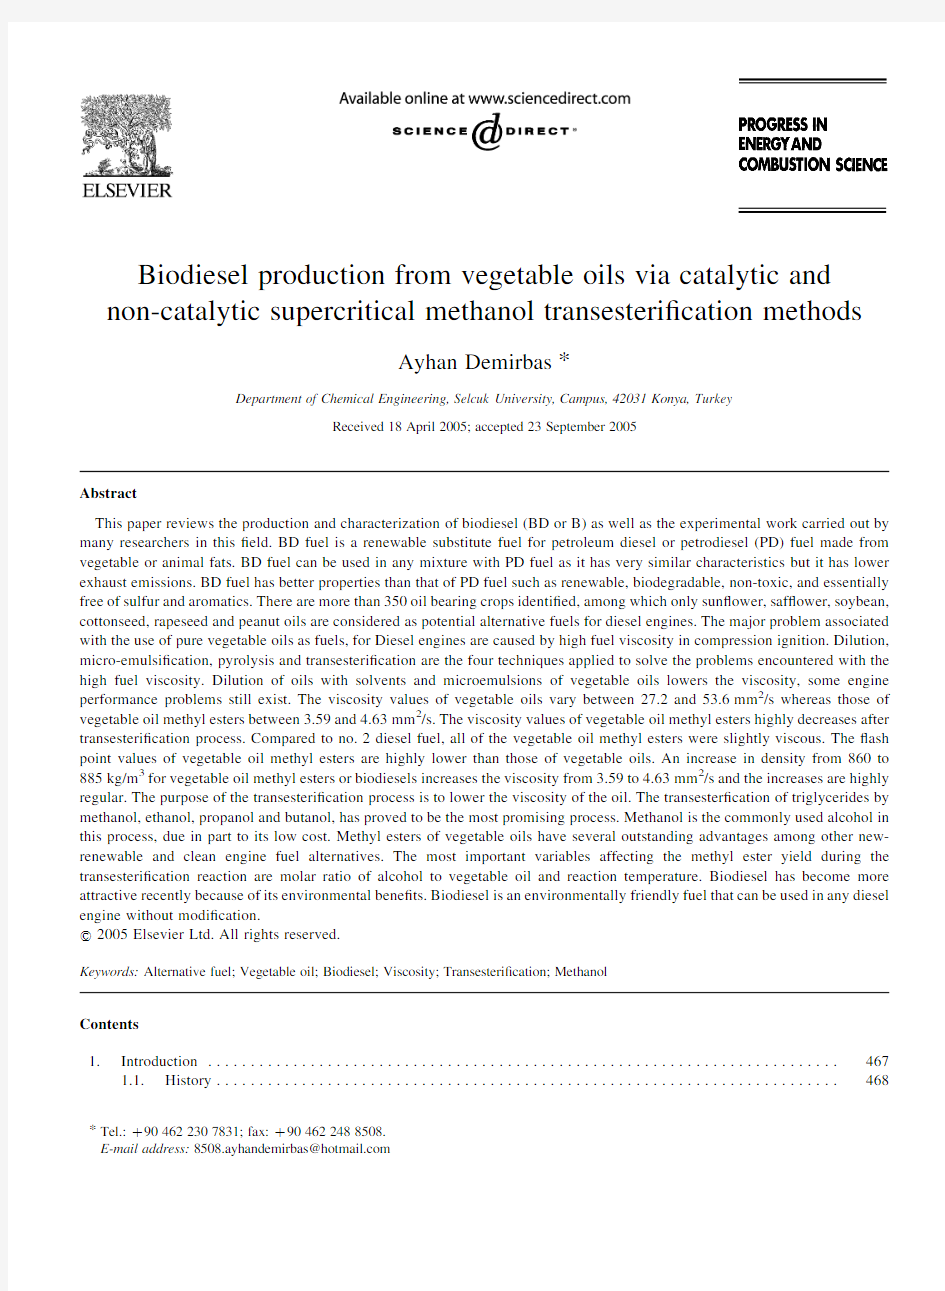 Biodiesel-production-from-vegetable-oils-via-catalytic-and-non-catalytic-supercritical-methanol-tran